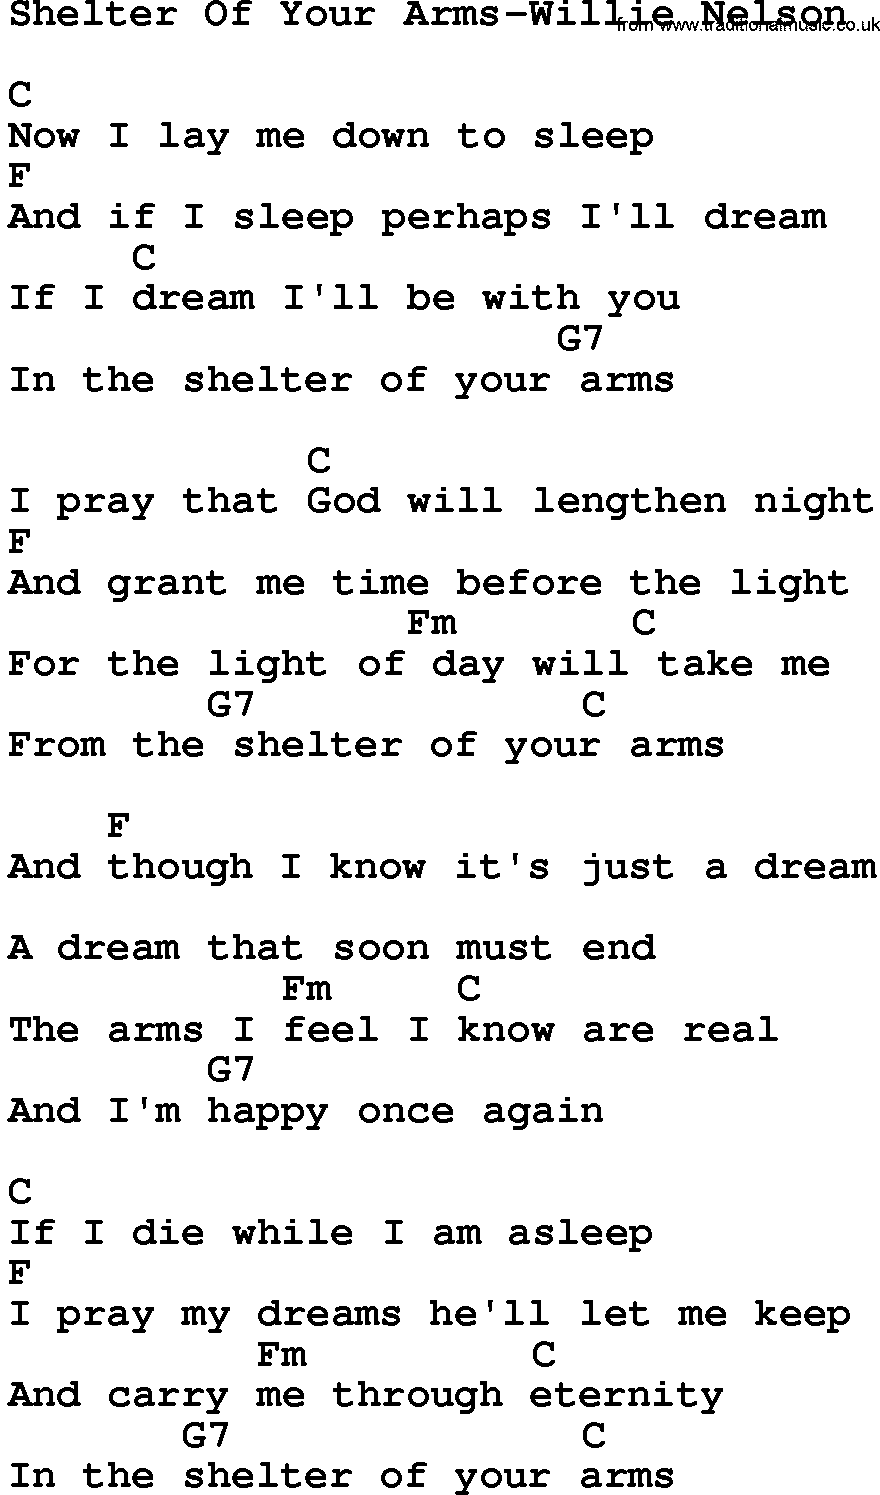 Country music song: Shelter Of Your Arms-Willie Nelson lyrics and chords